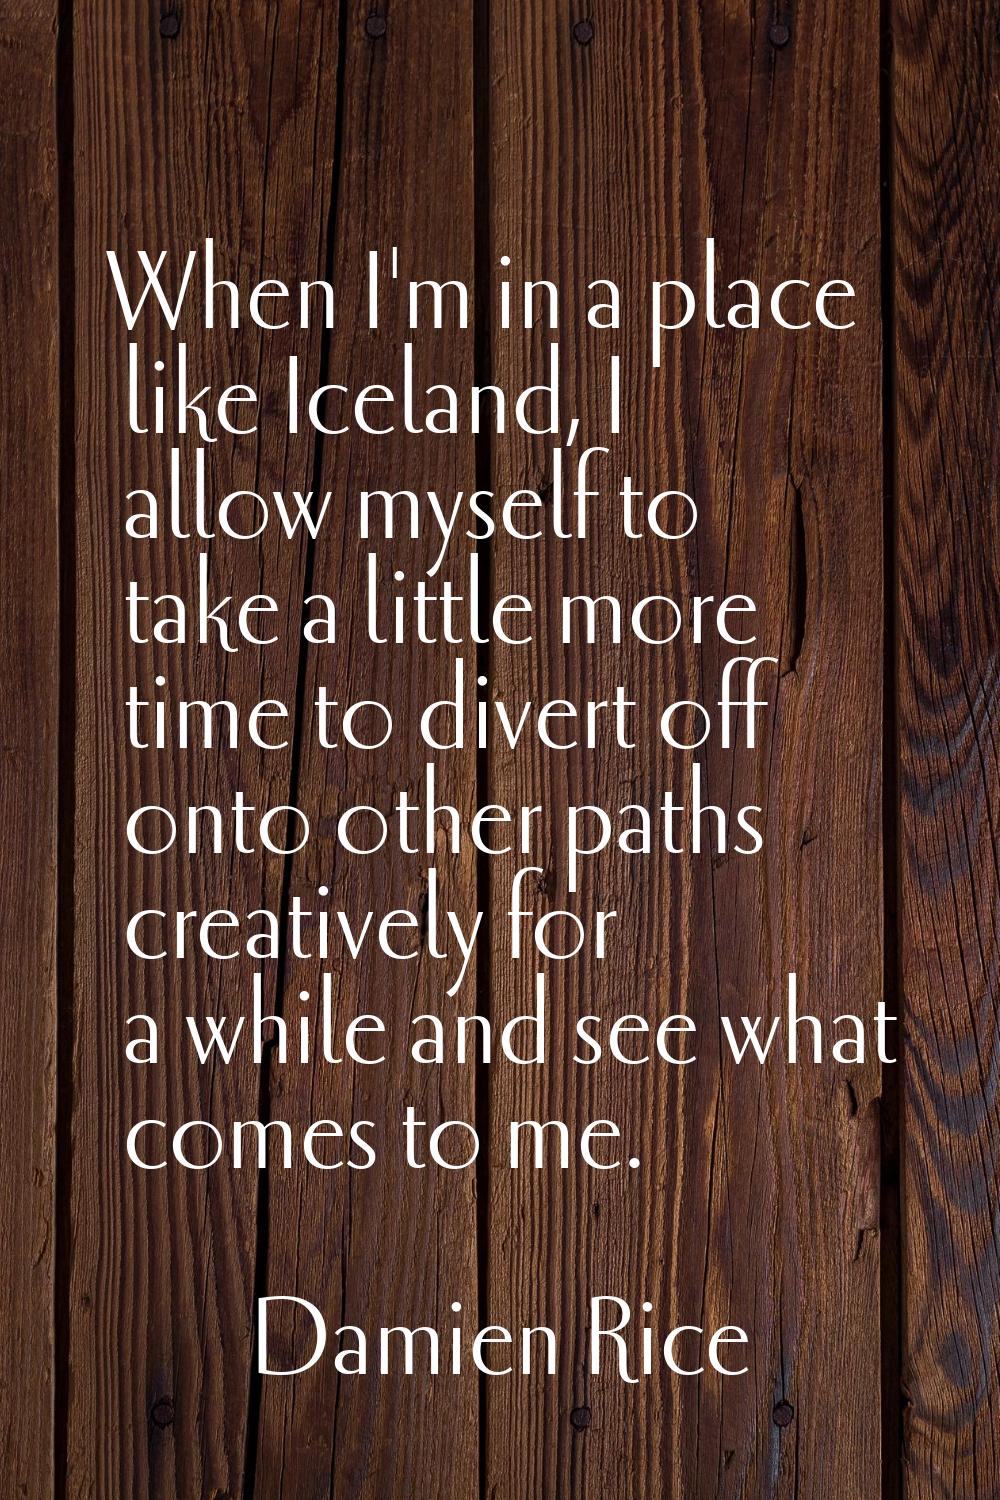 When I'm in a place like Iceland, I allow myself to take a little more time to divert off onto othe